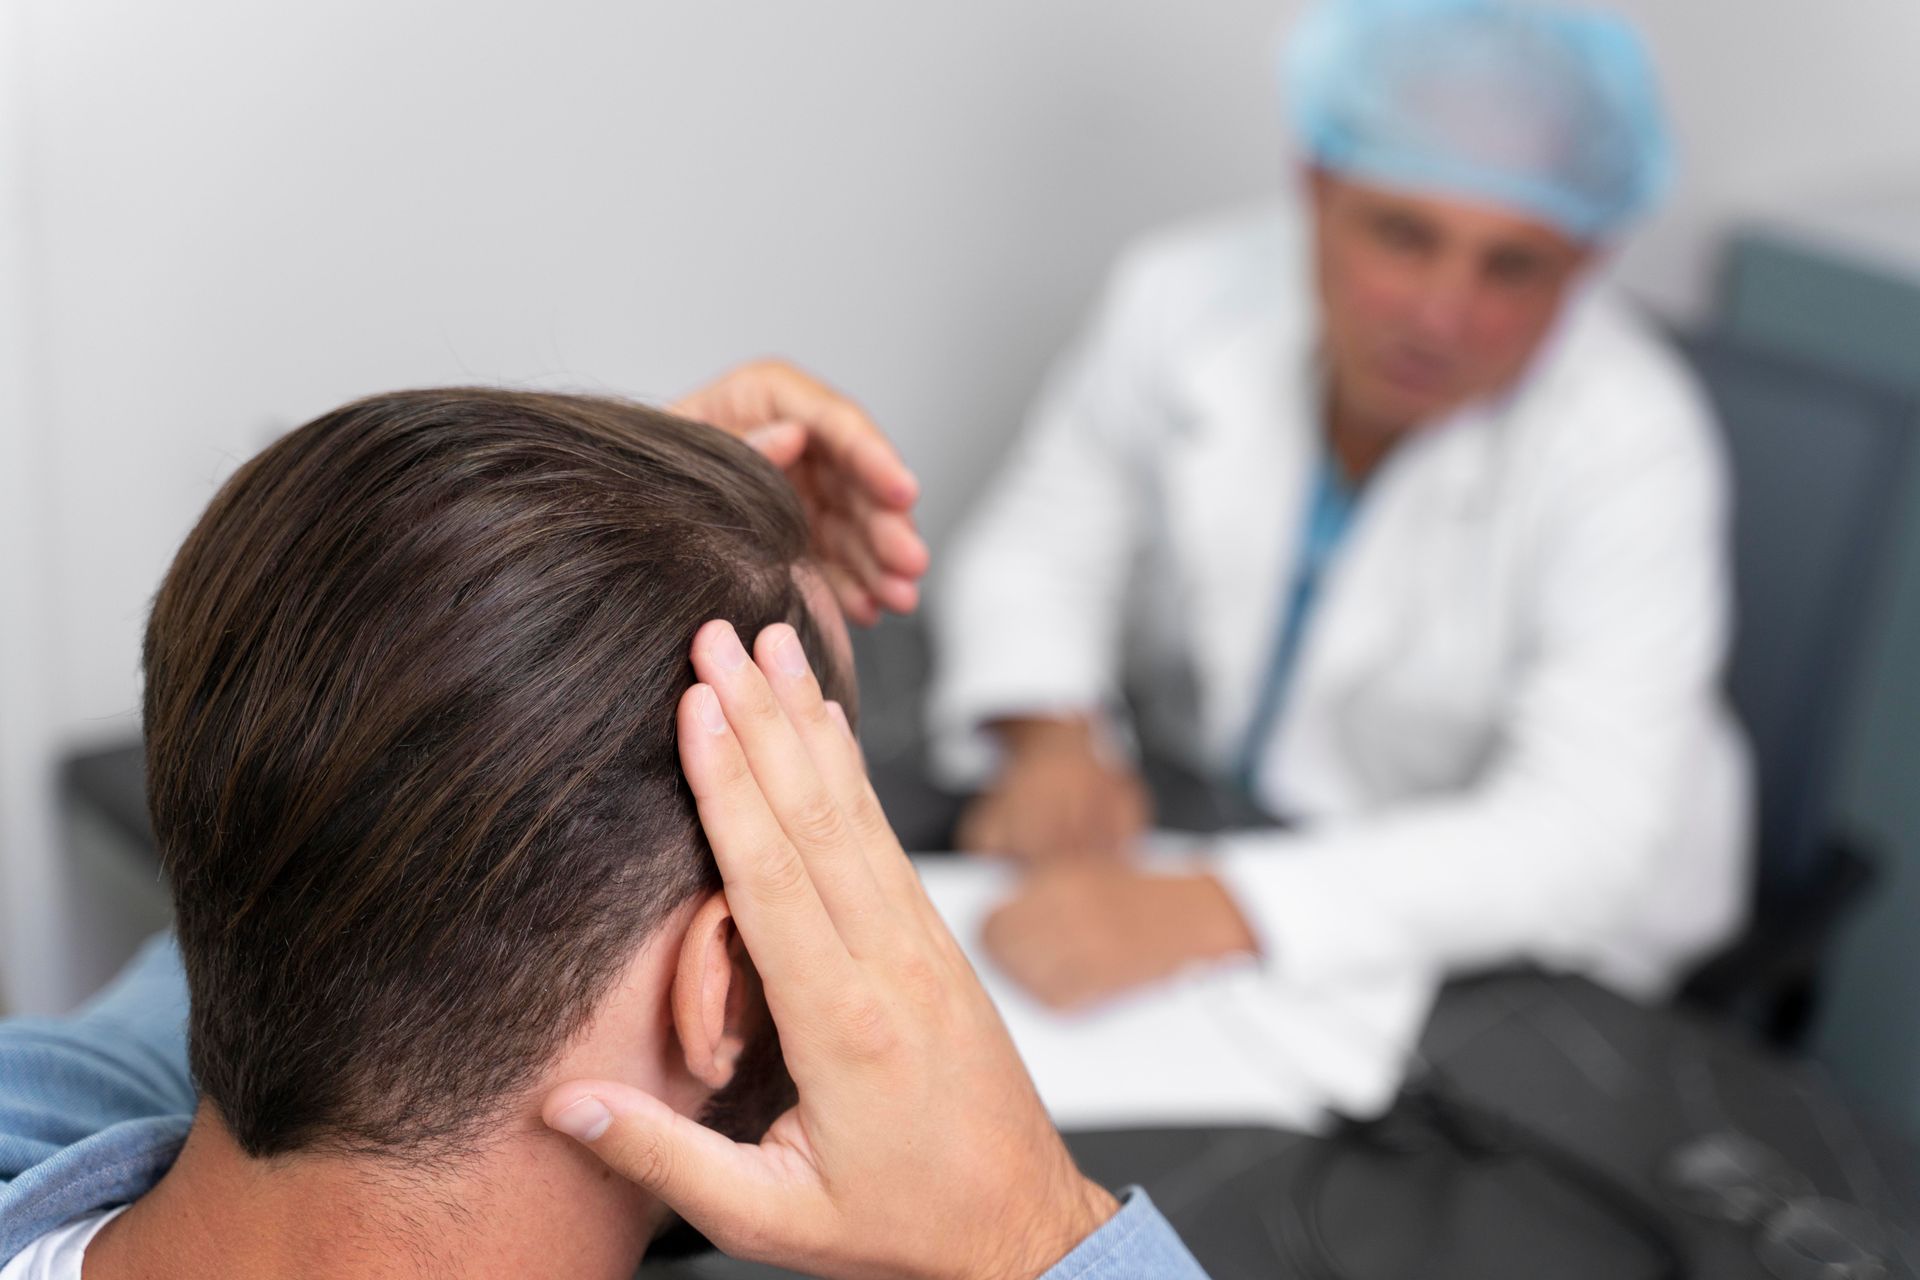 a man has his hand on his head while a doctor looks on